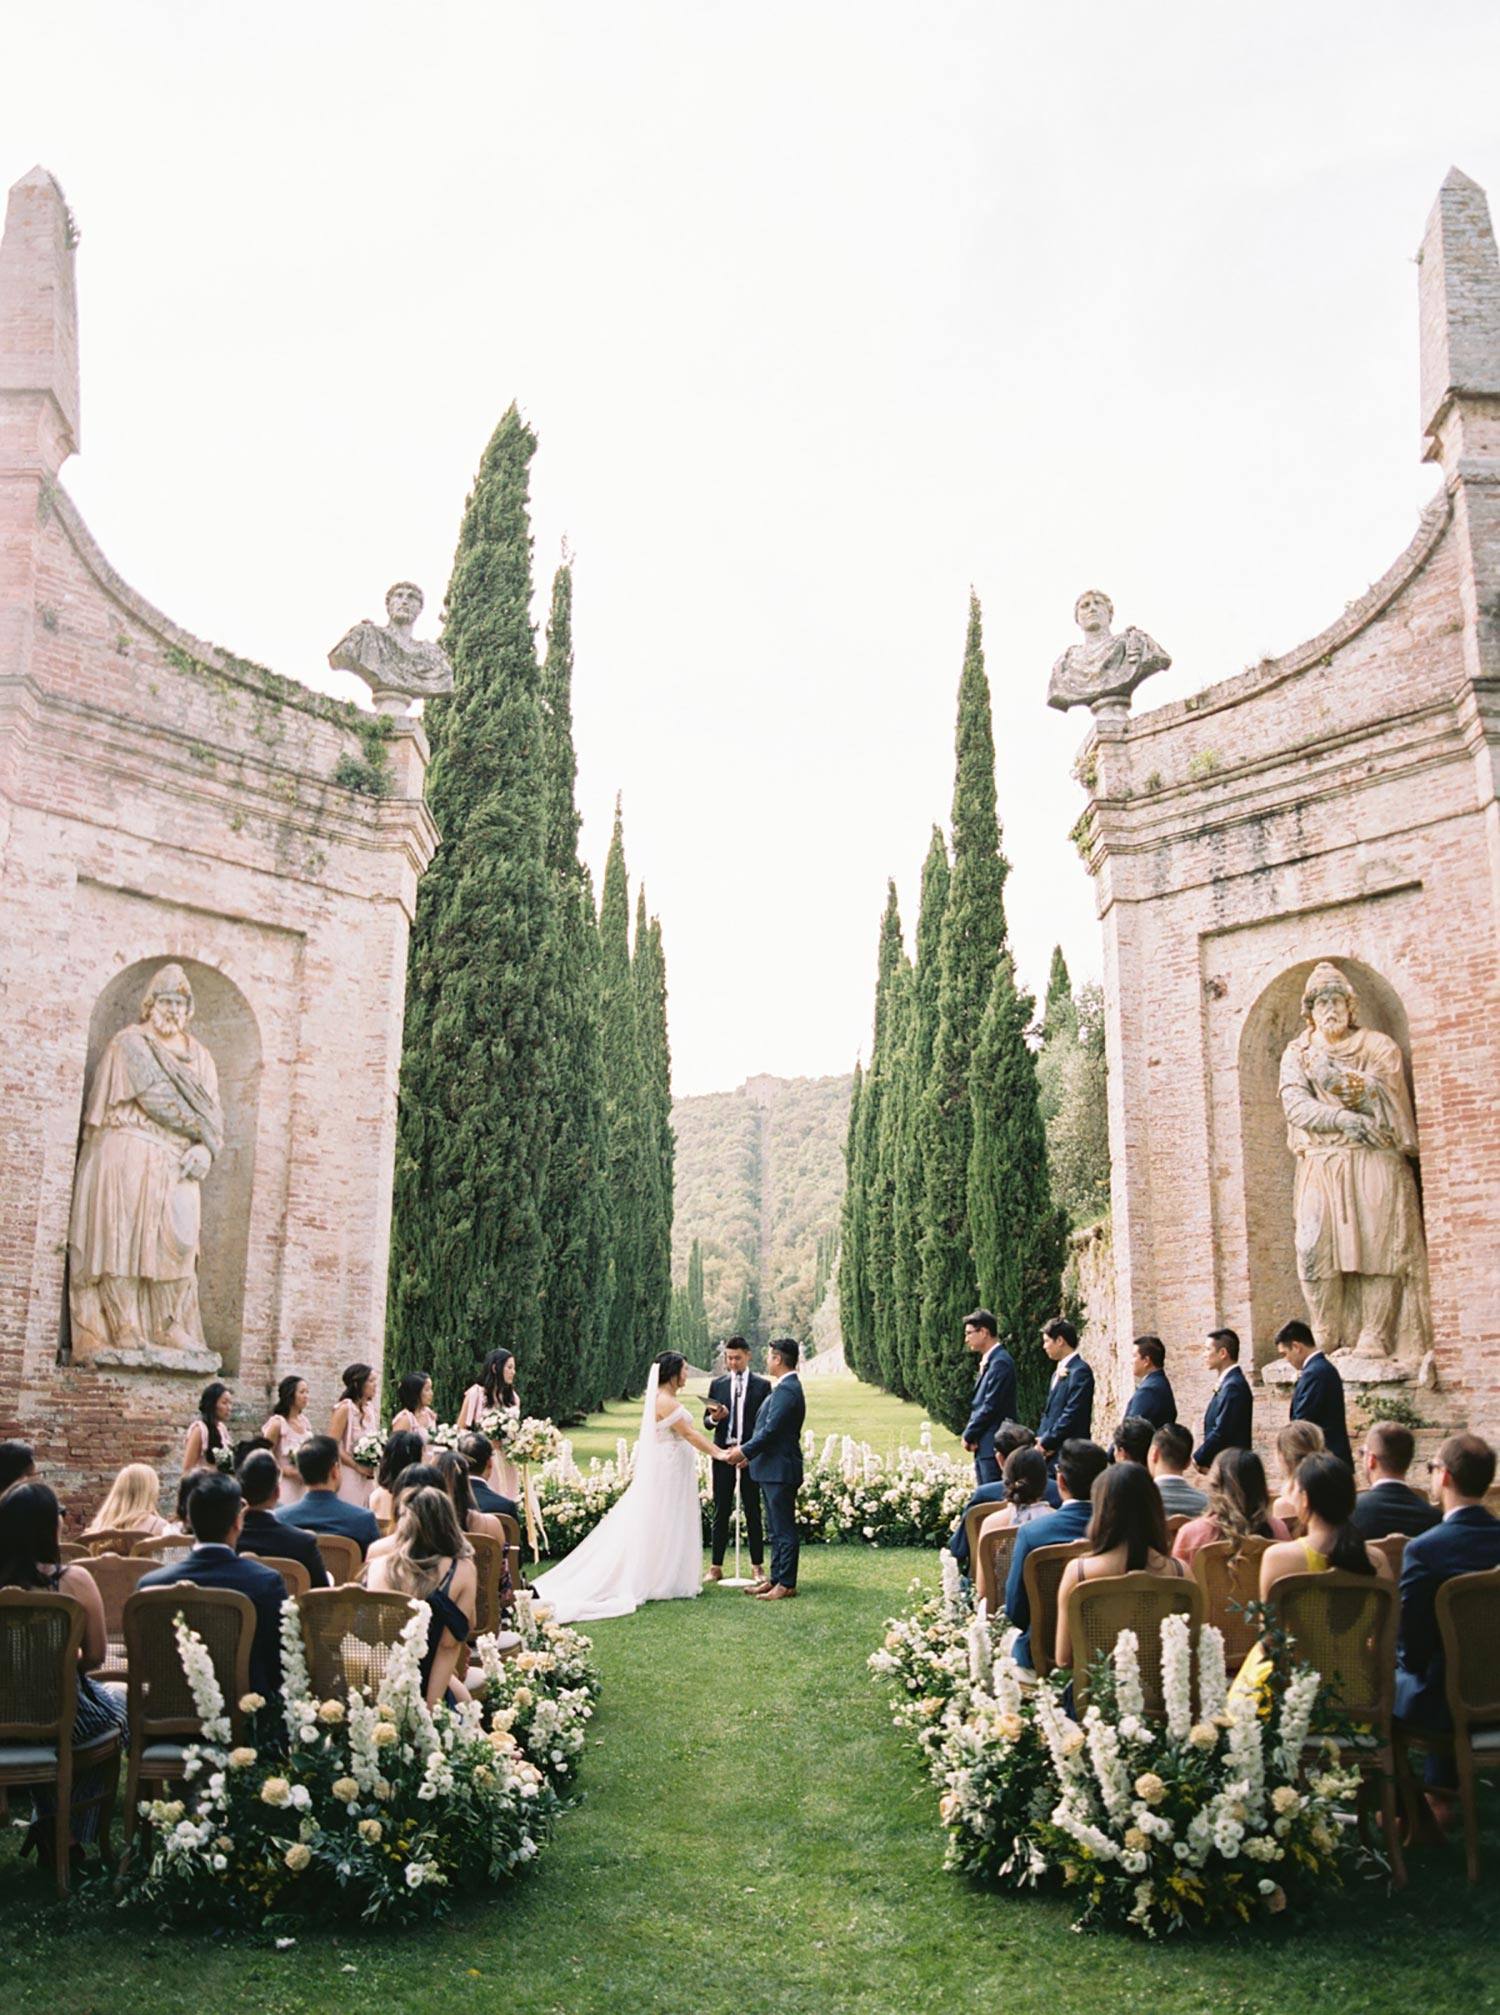 Italian villa wedding ceremony with cypress trees, cane back chairs and lush green and white flower aisle